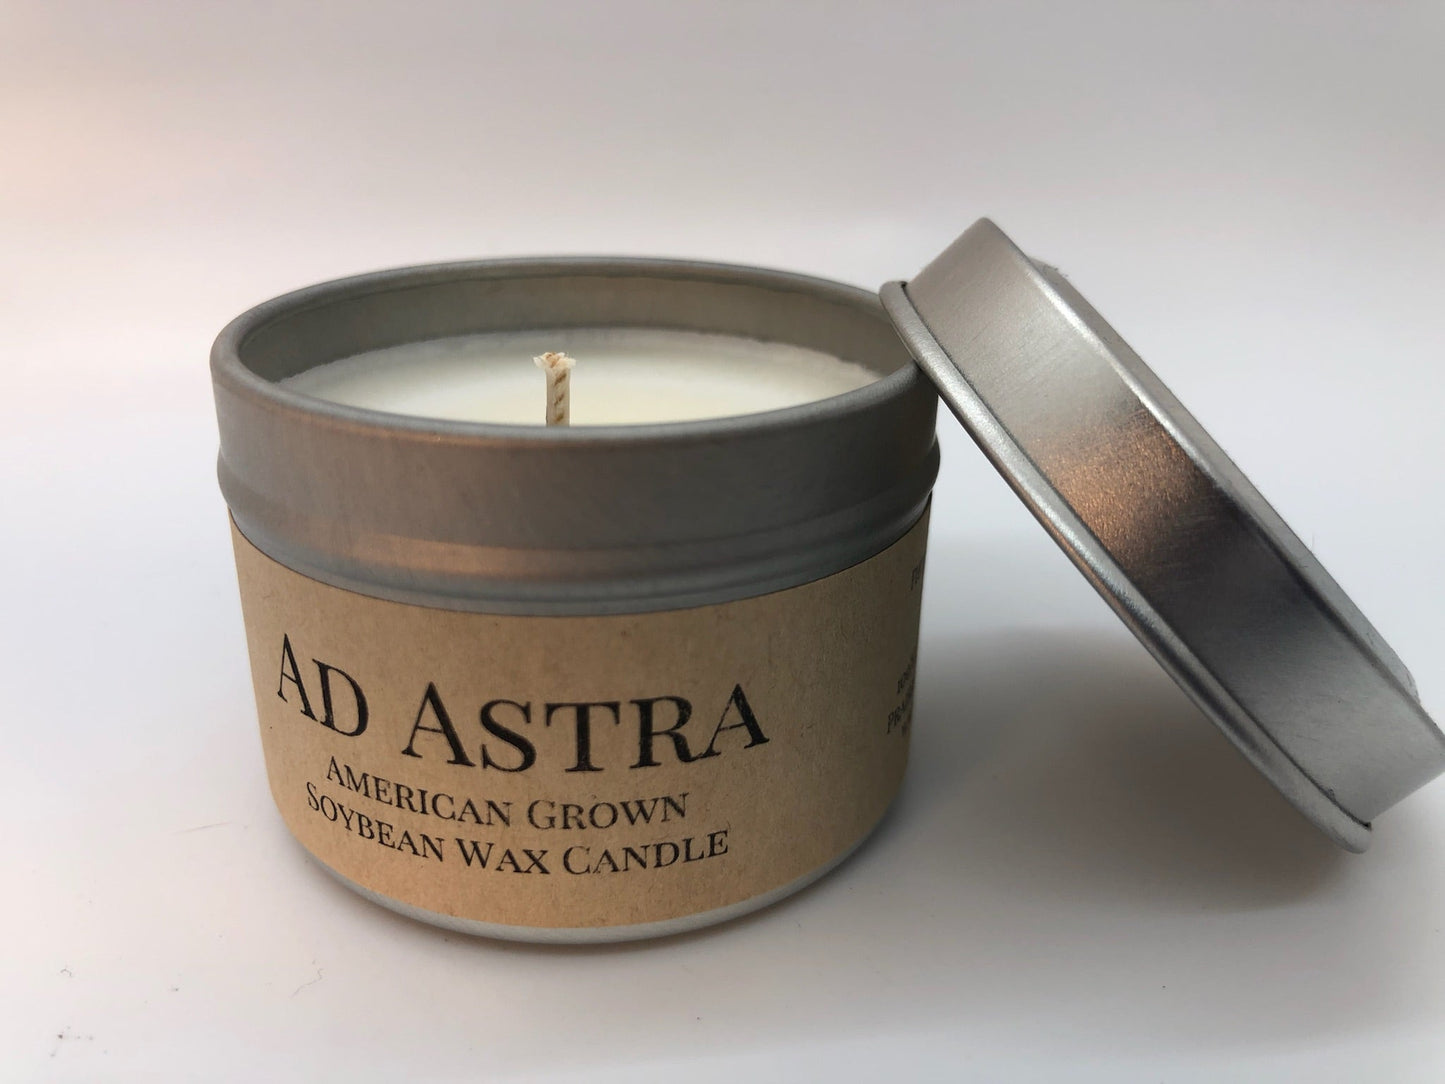 Ad Astra Soy Candle | 2 oz Travel Tin